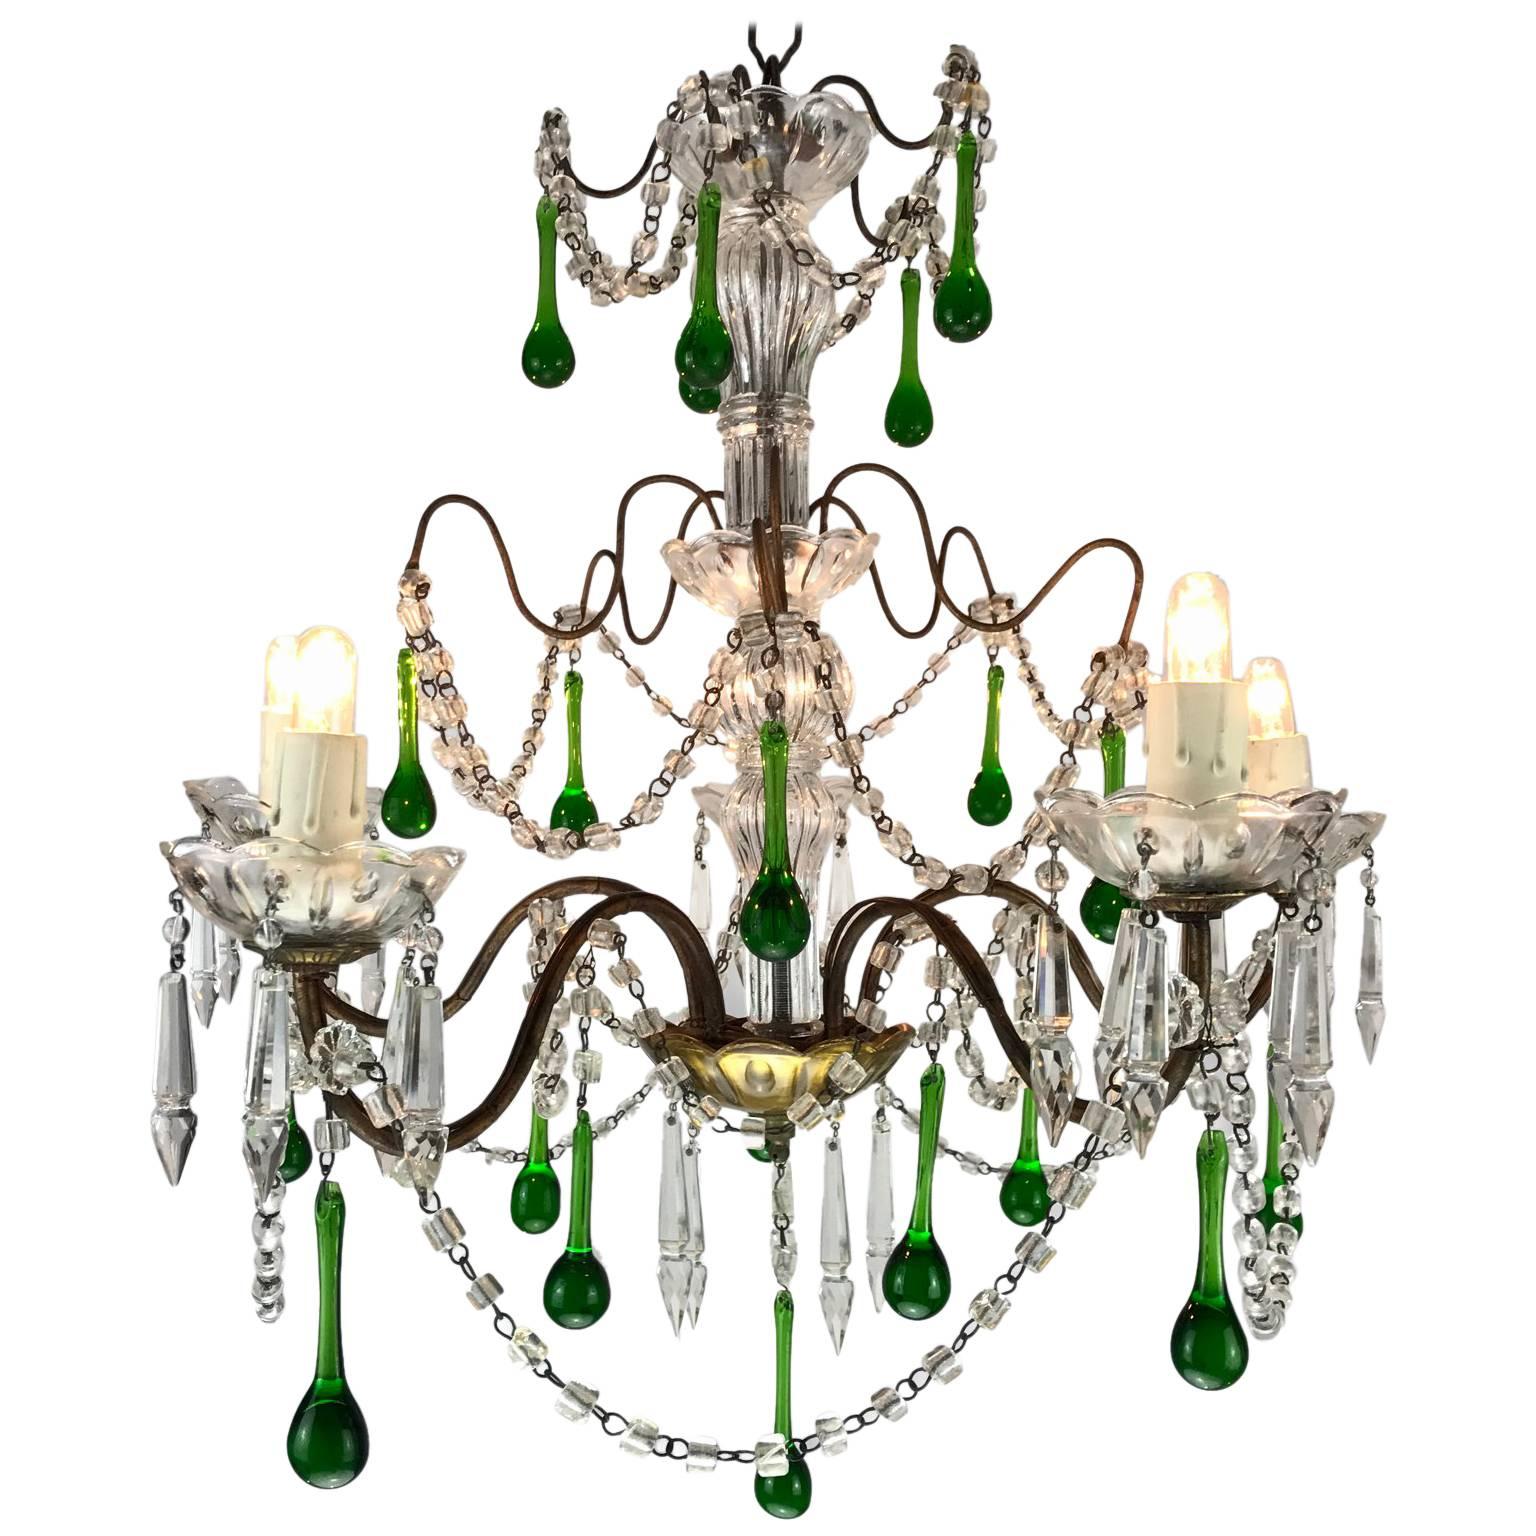 Vintage Italian Five-Light Crystal Chandelier with Green Crystal Drops 1970s